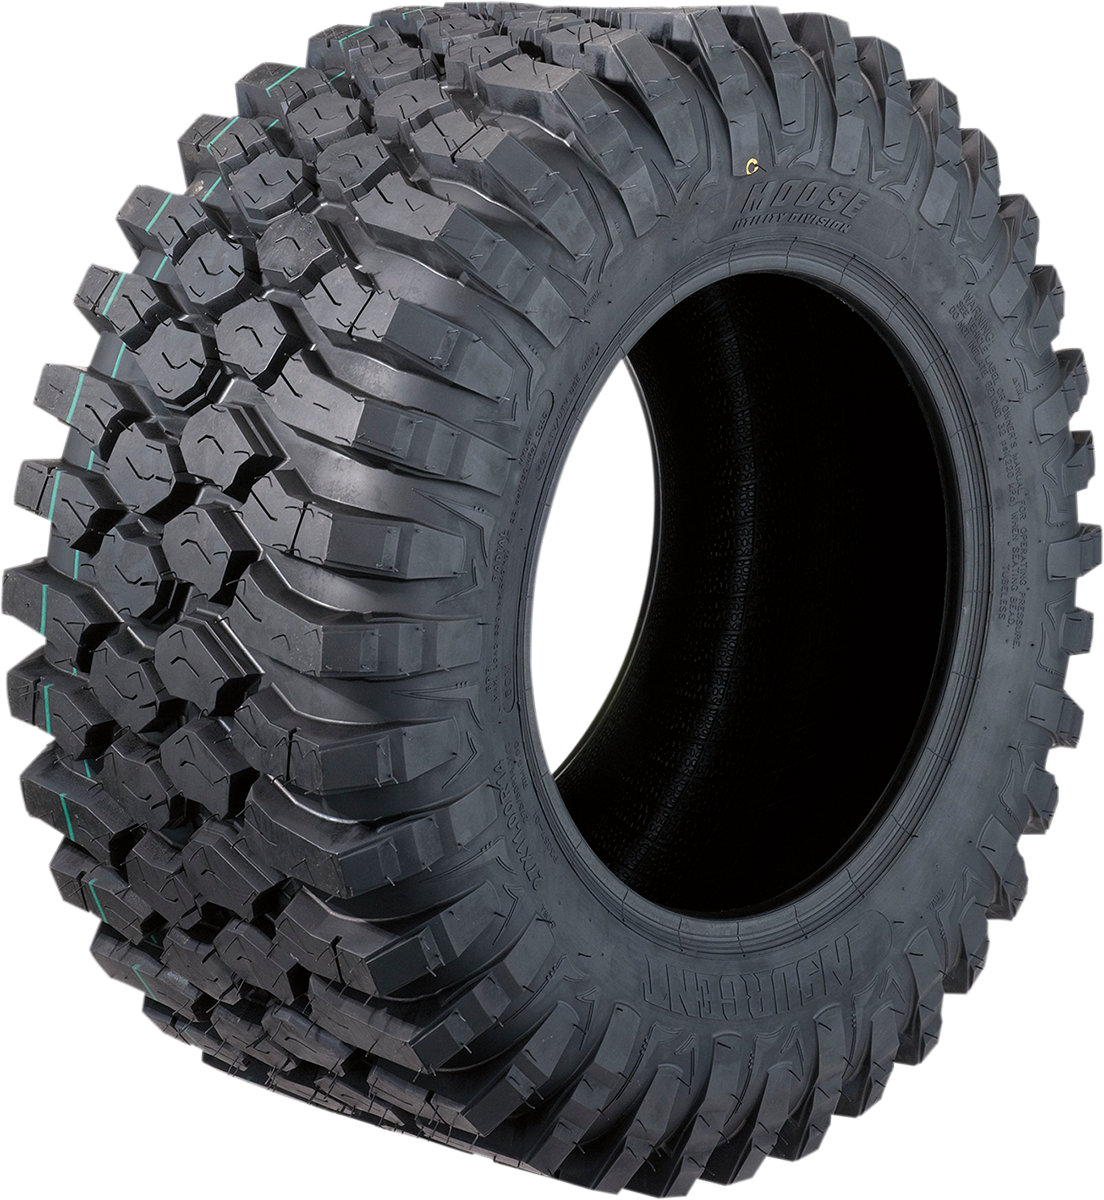 MOOSE UTILITY Tire - Insurgent - Front/Rear - 28x10R15 - 8 Ply 30572810158RDOT